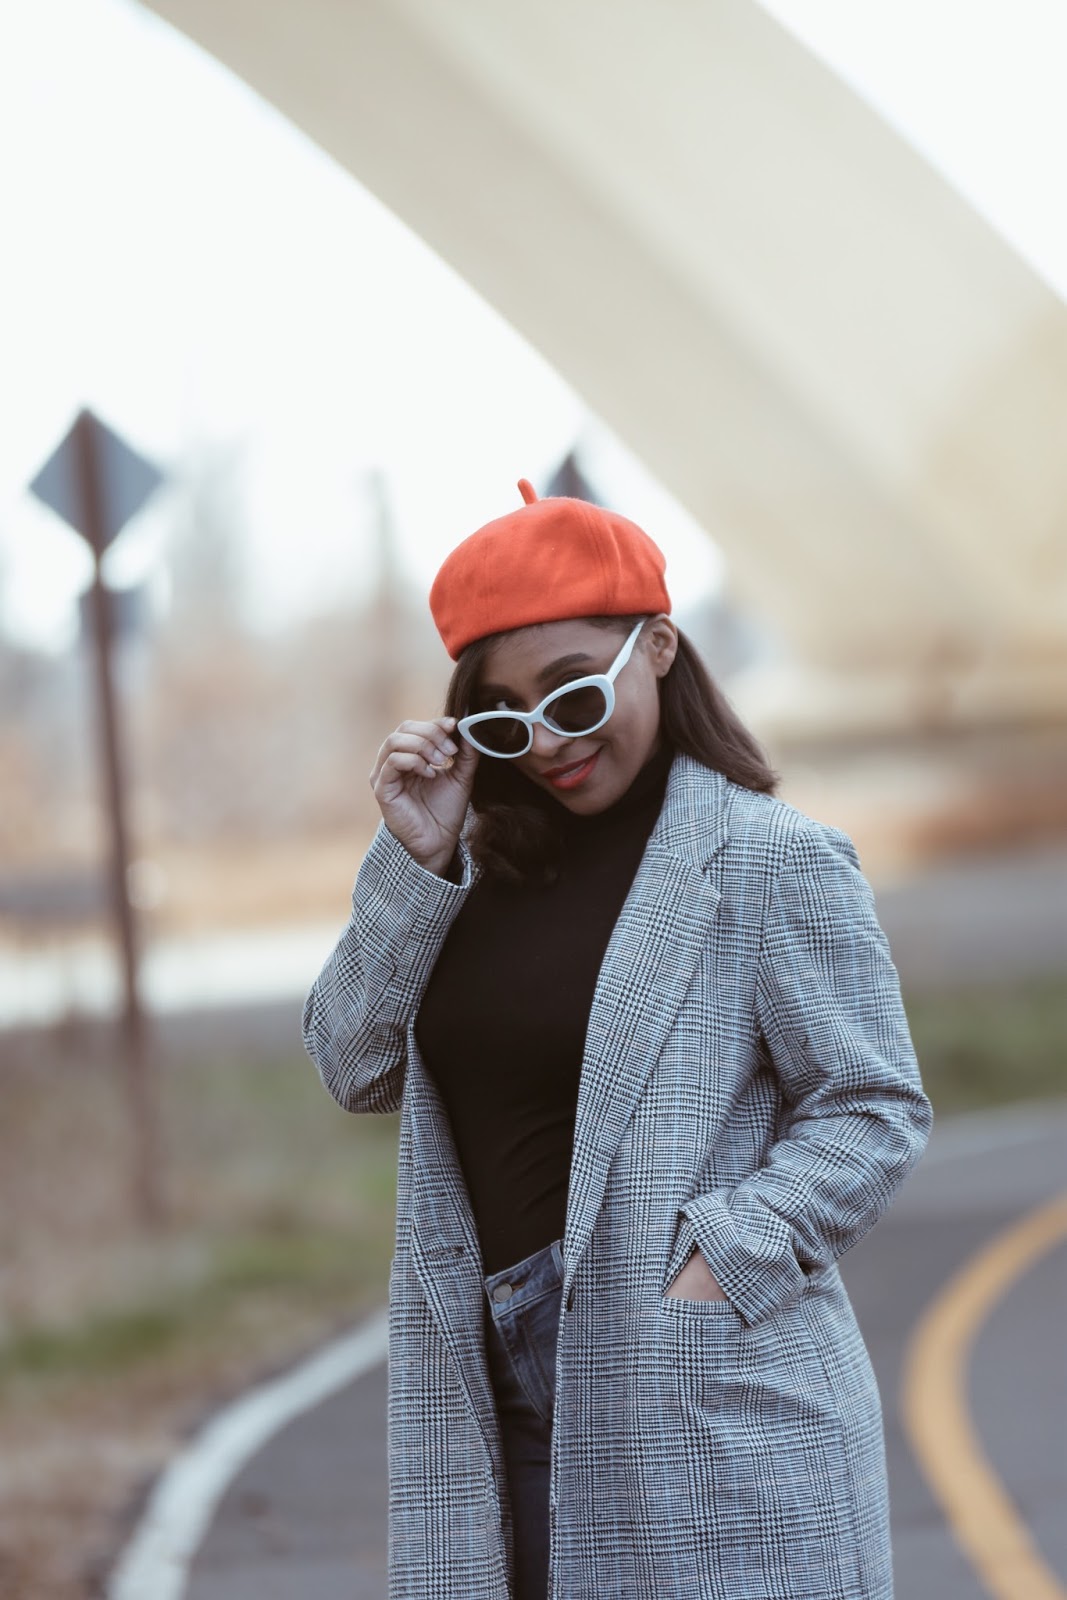 dominican blogger, oversized coat, beret, winter trends, latina bloggers, winter outfit ideas, winter trends, pea coat